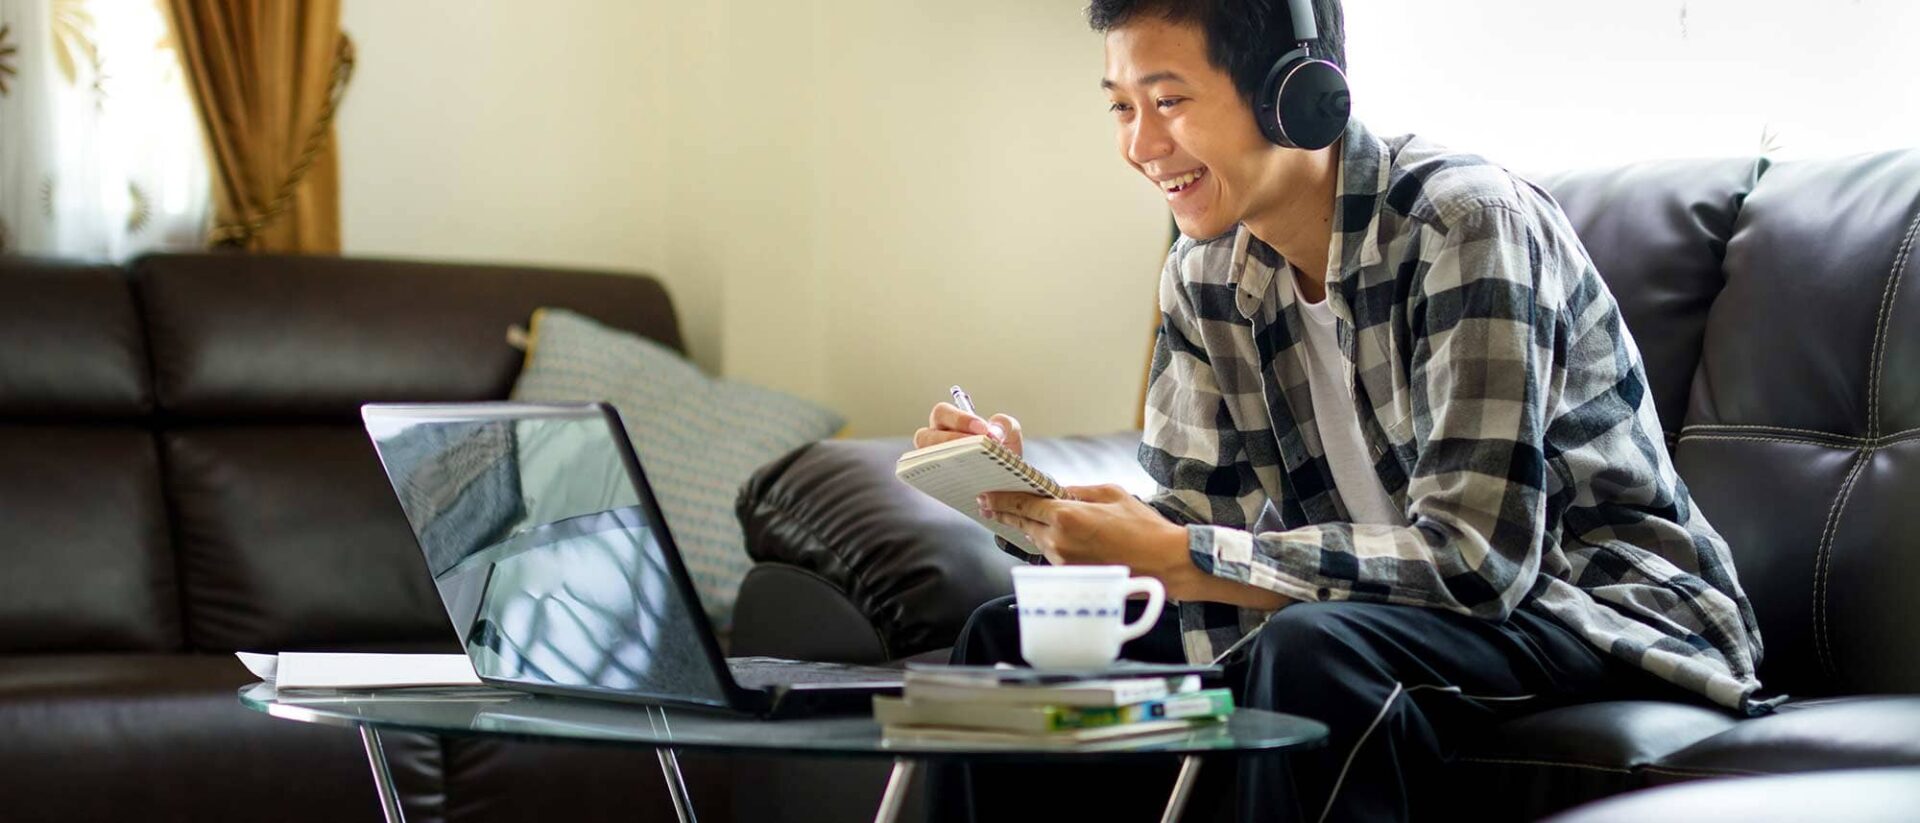 Student with headphones attending an online class image